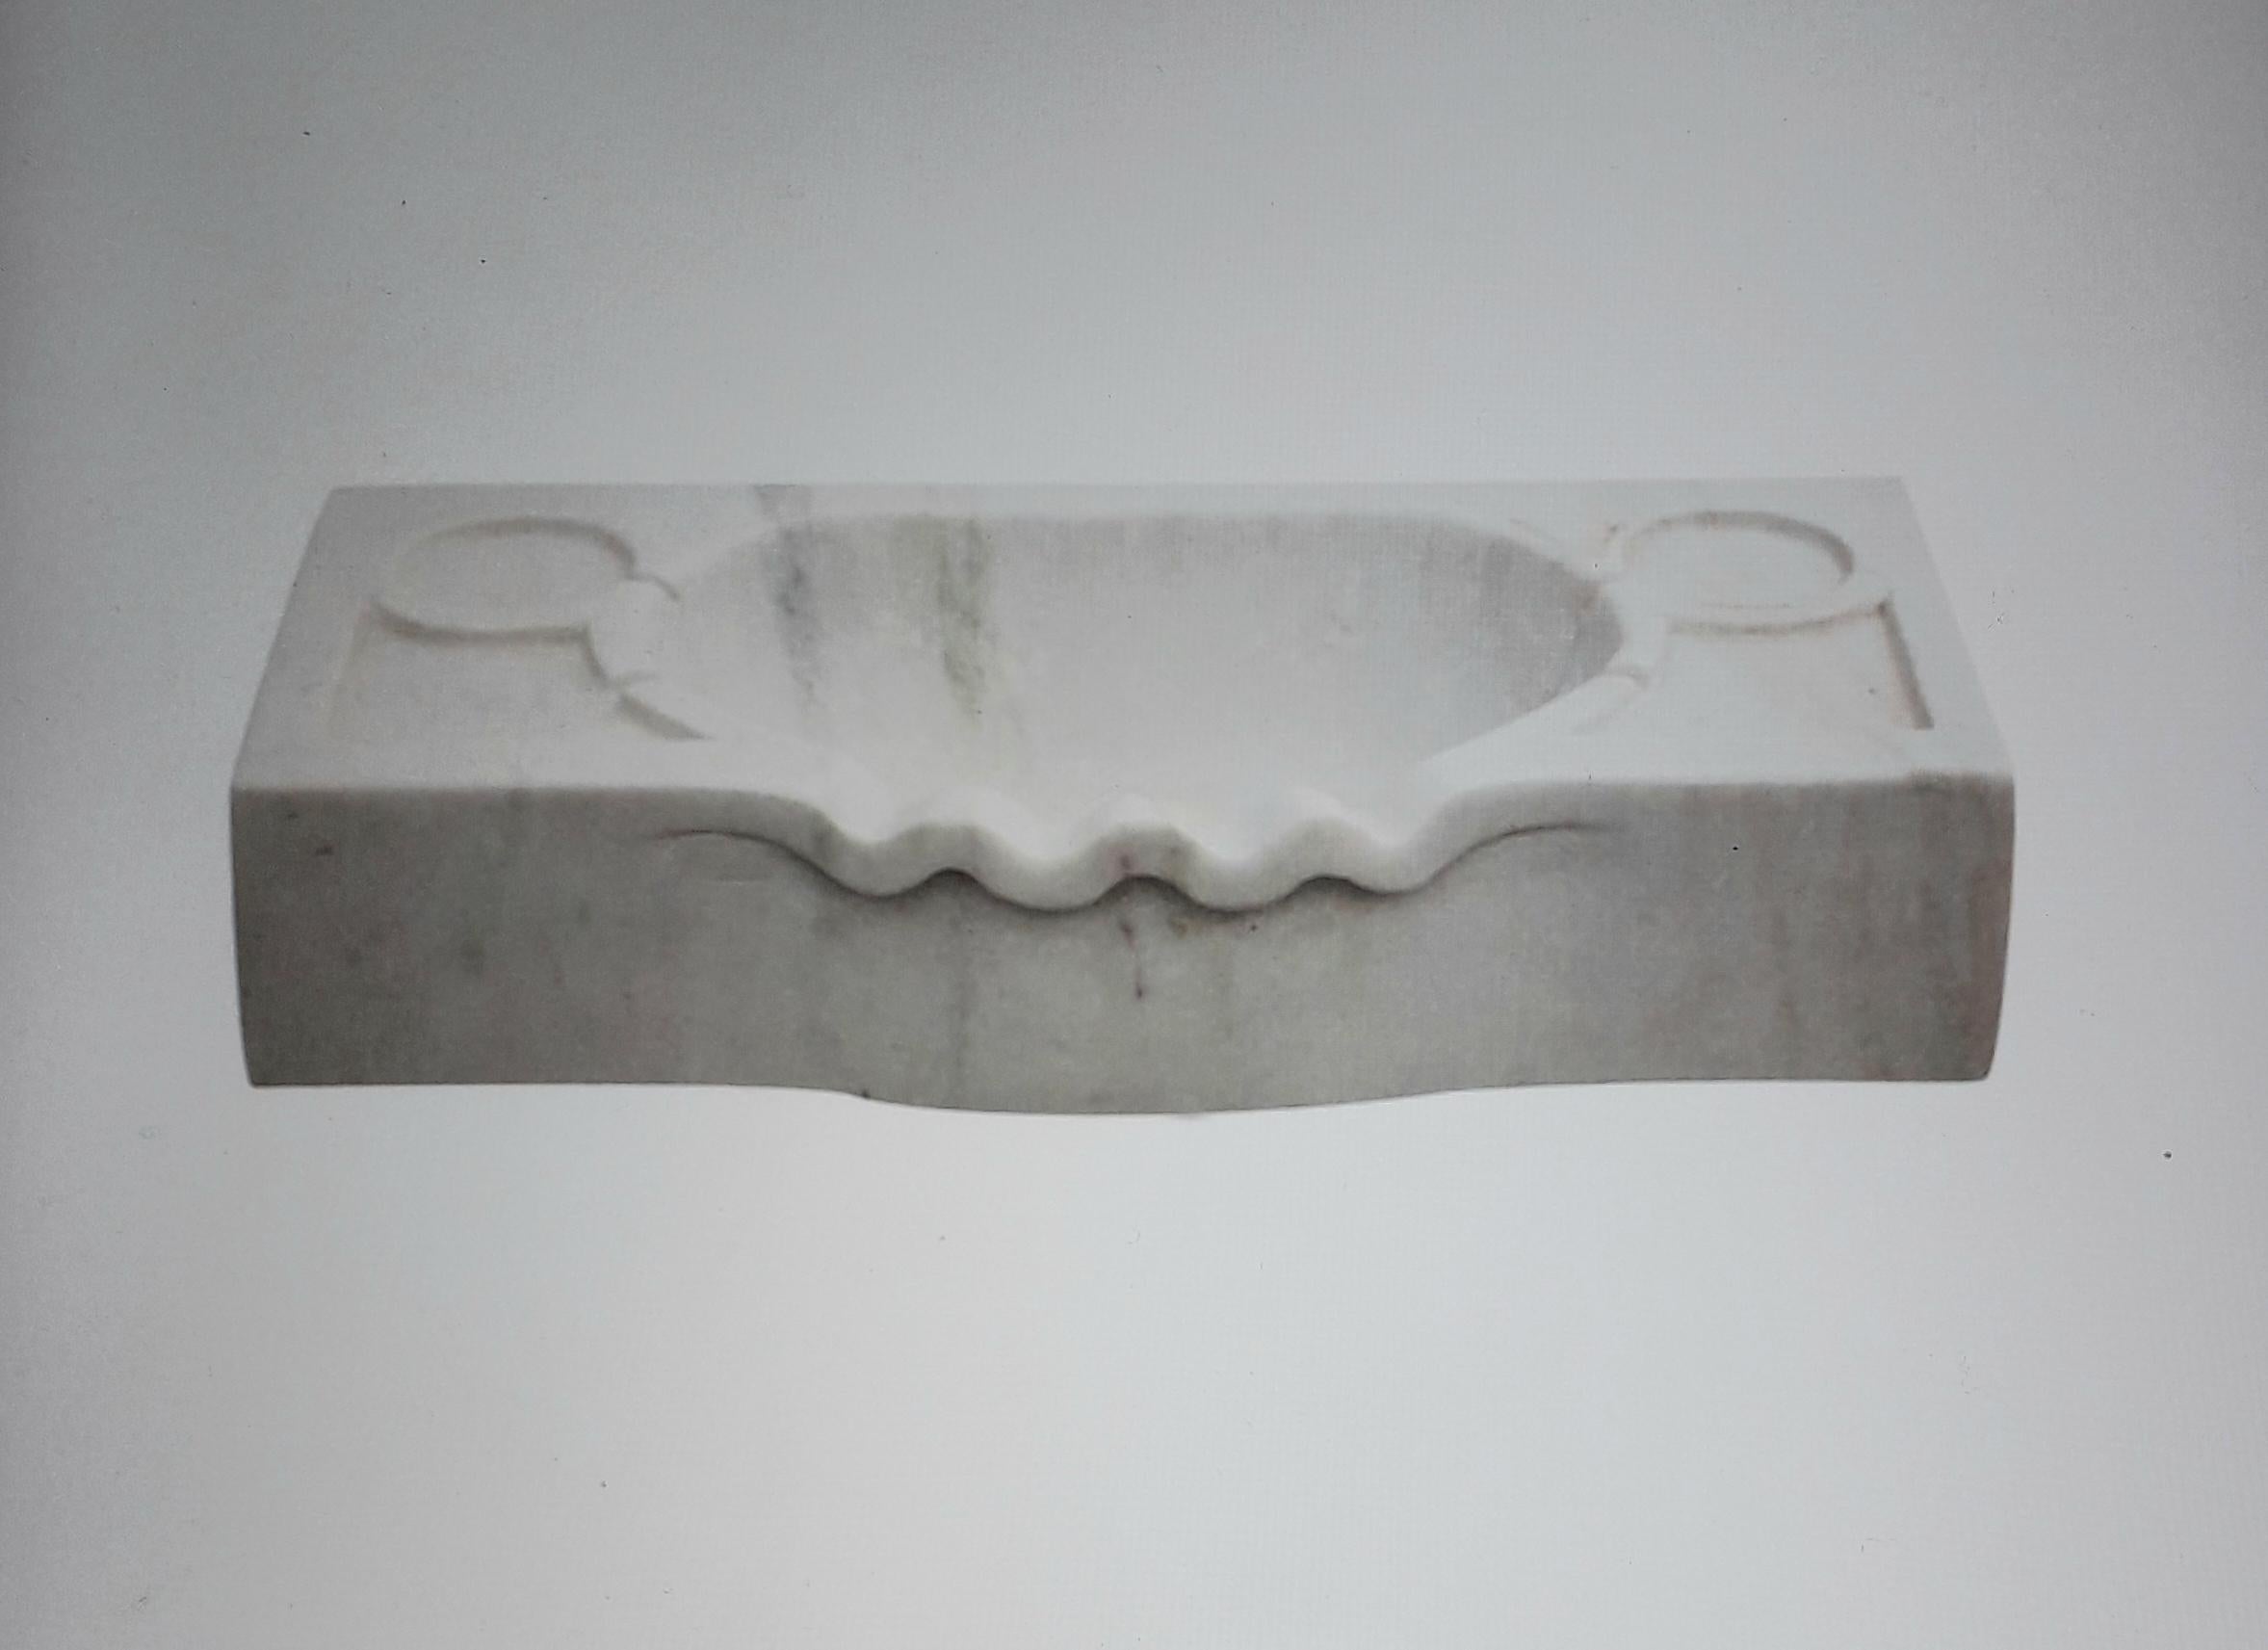 Classical Italian scalloped sink basin cut from one single block of Carrara marble.
Ideal in or outside decorative feature.

Custom sizes available as last image of a 24